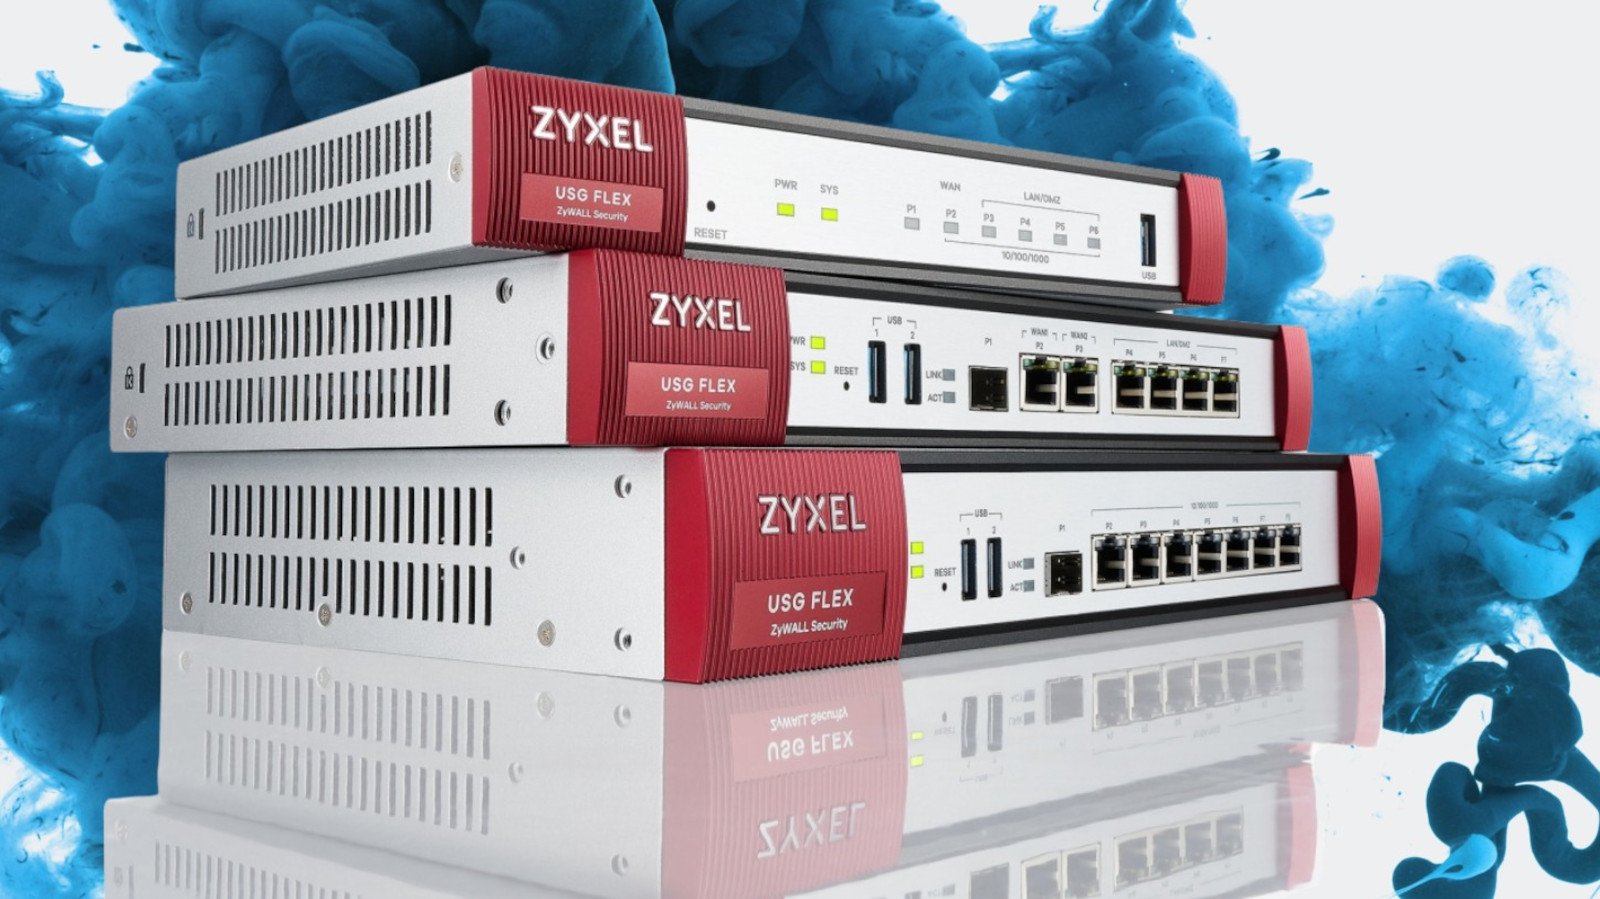 Zyxel networking devices